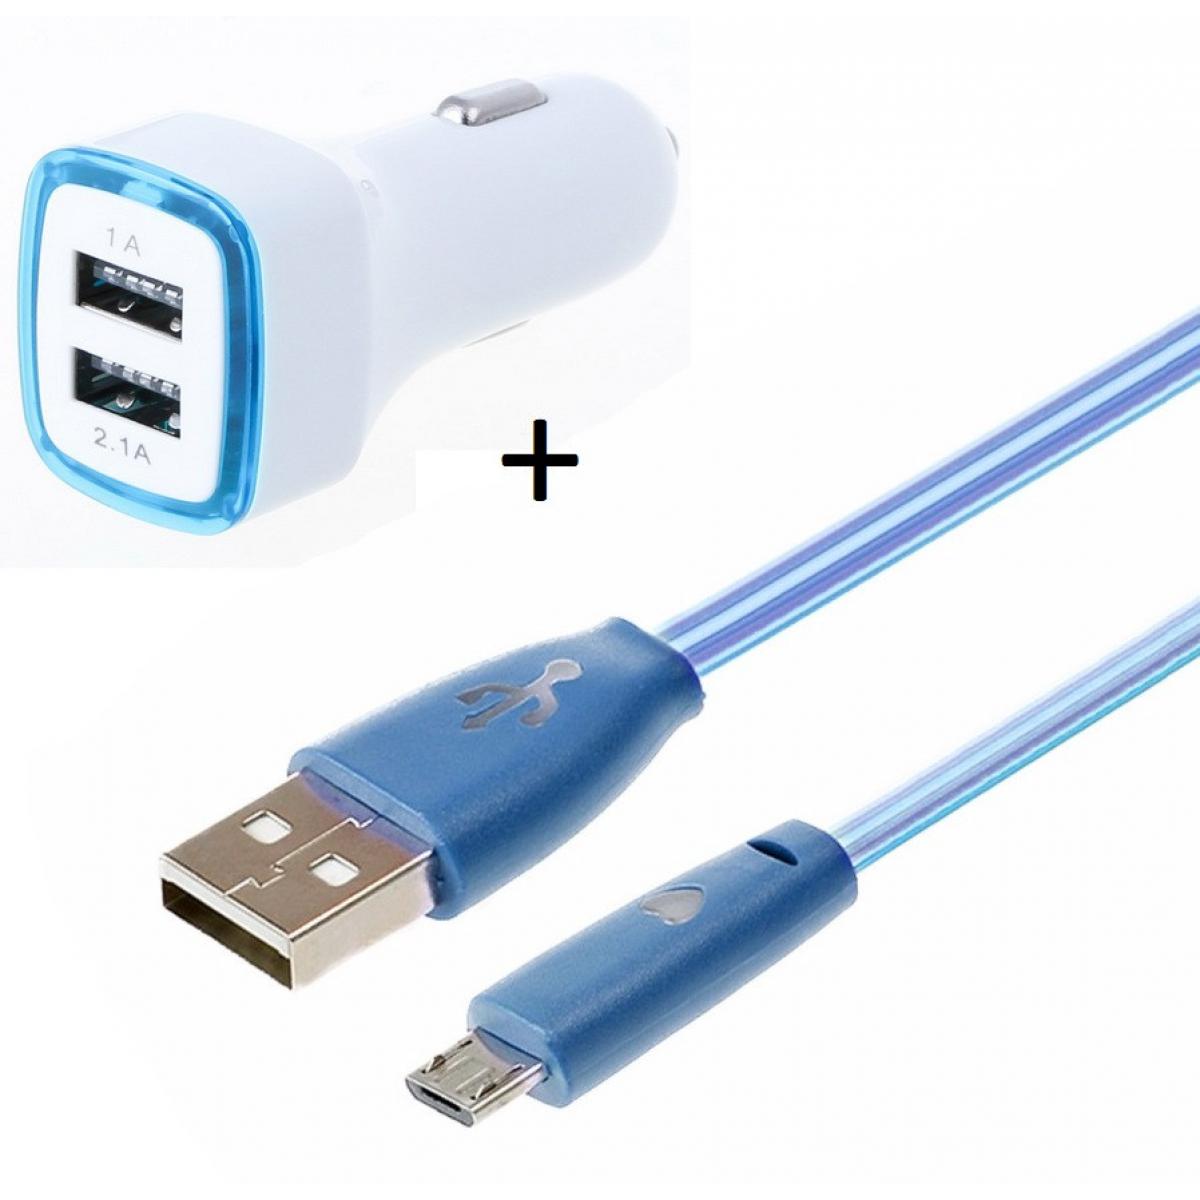 Shot - Pack Chargeur Voiture pour WIKO View 4 Lite Smartphone Micro USB (Cable Smiley + Double Adaptateur LED Allume Cigare) (BLEU) - Chargeur Voiture 12V